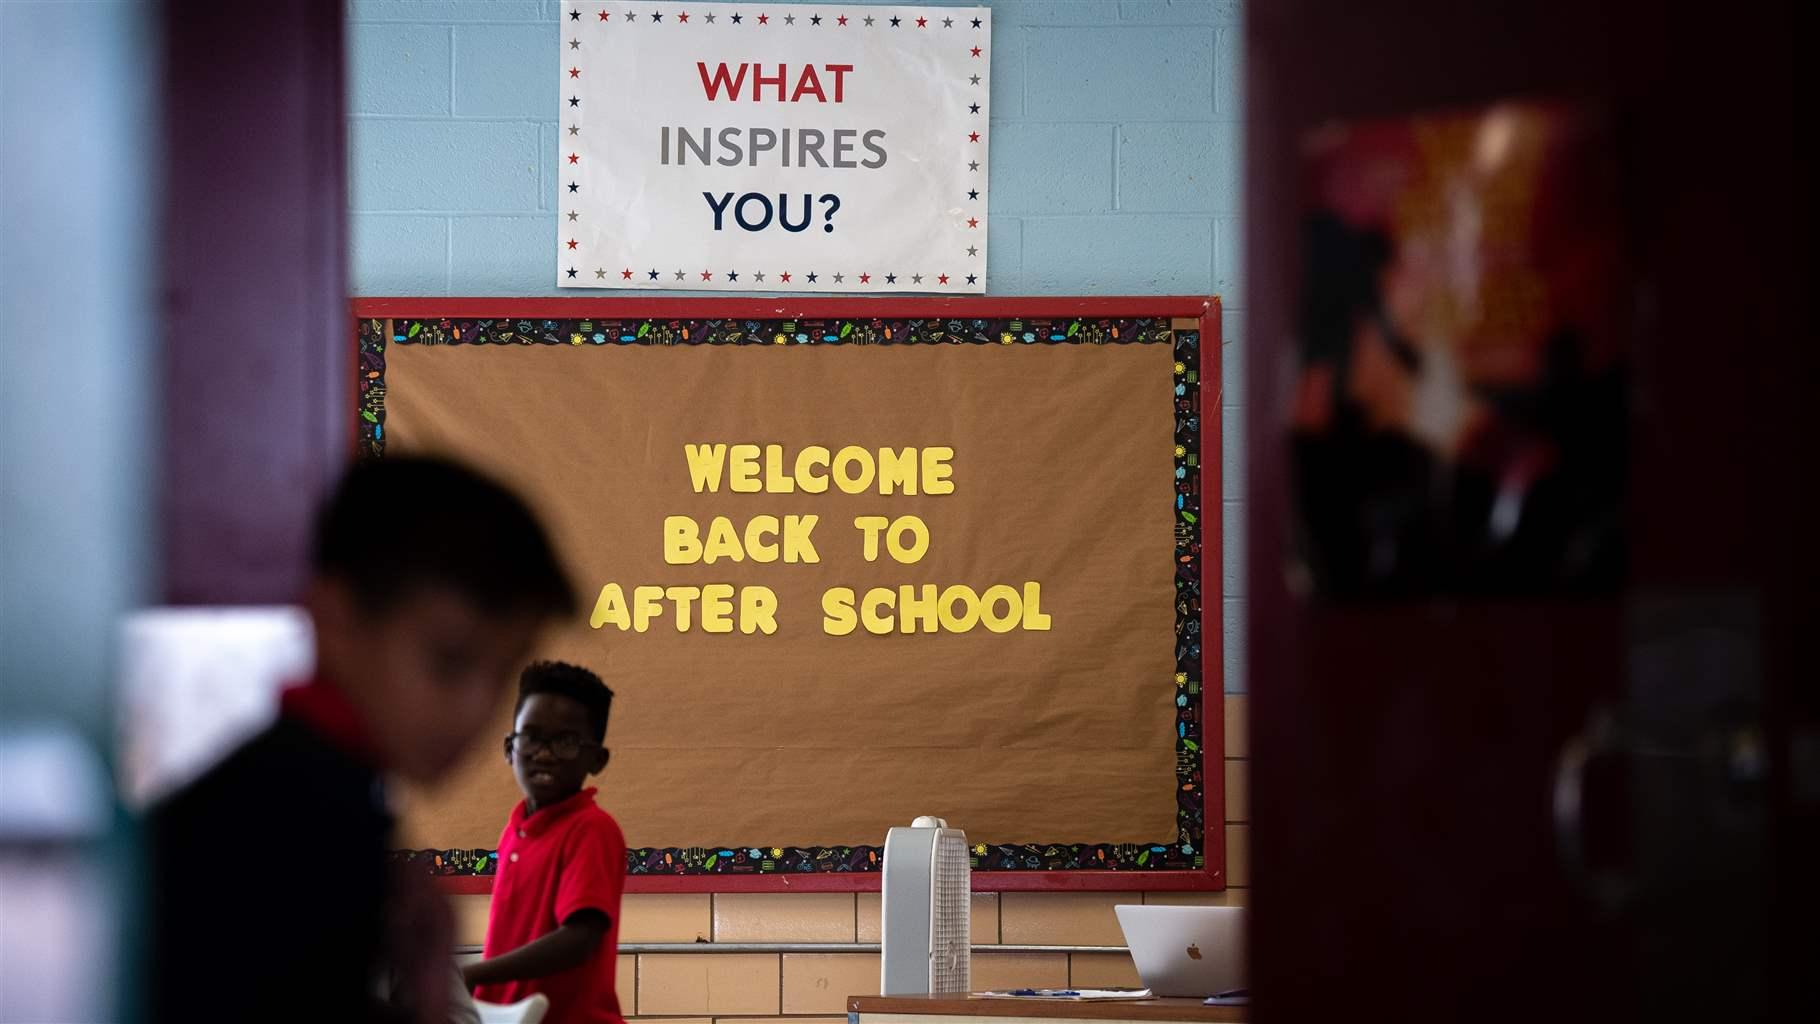 Yellow cutout letters on a bulletin board spell: “Welcome Back to After School.” Above that, a white sign with red, blue, and gray letters reads, “What Inspires You?” An elementary school-age child stands in front of the signs, while another stands out of focus closer to the camera.